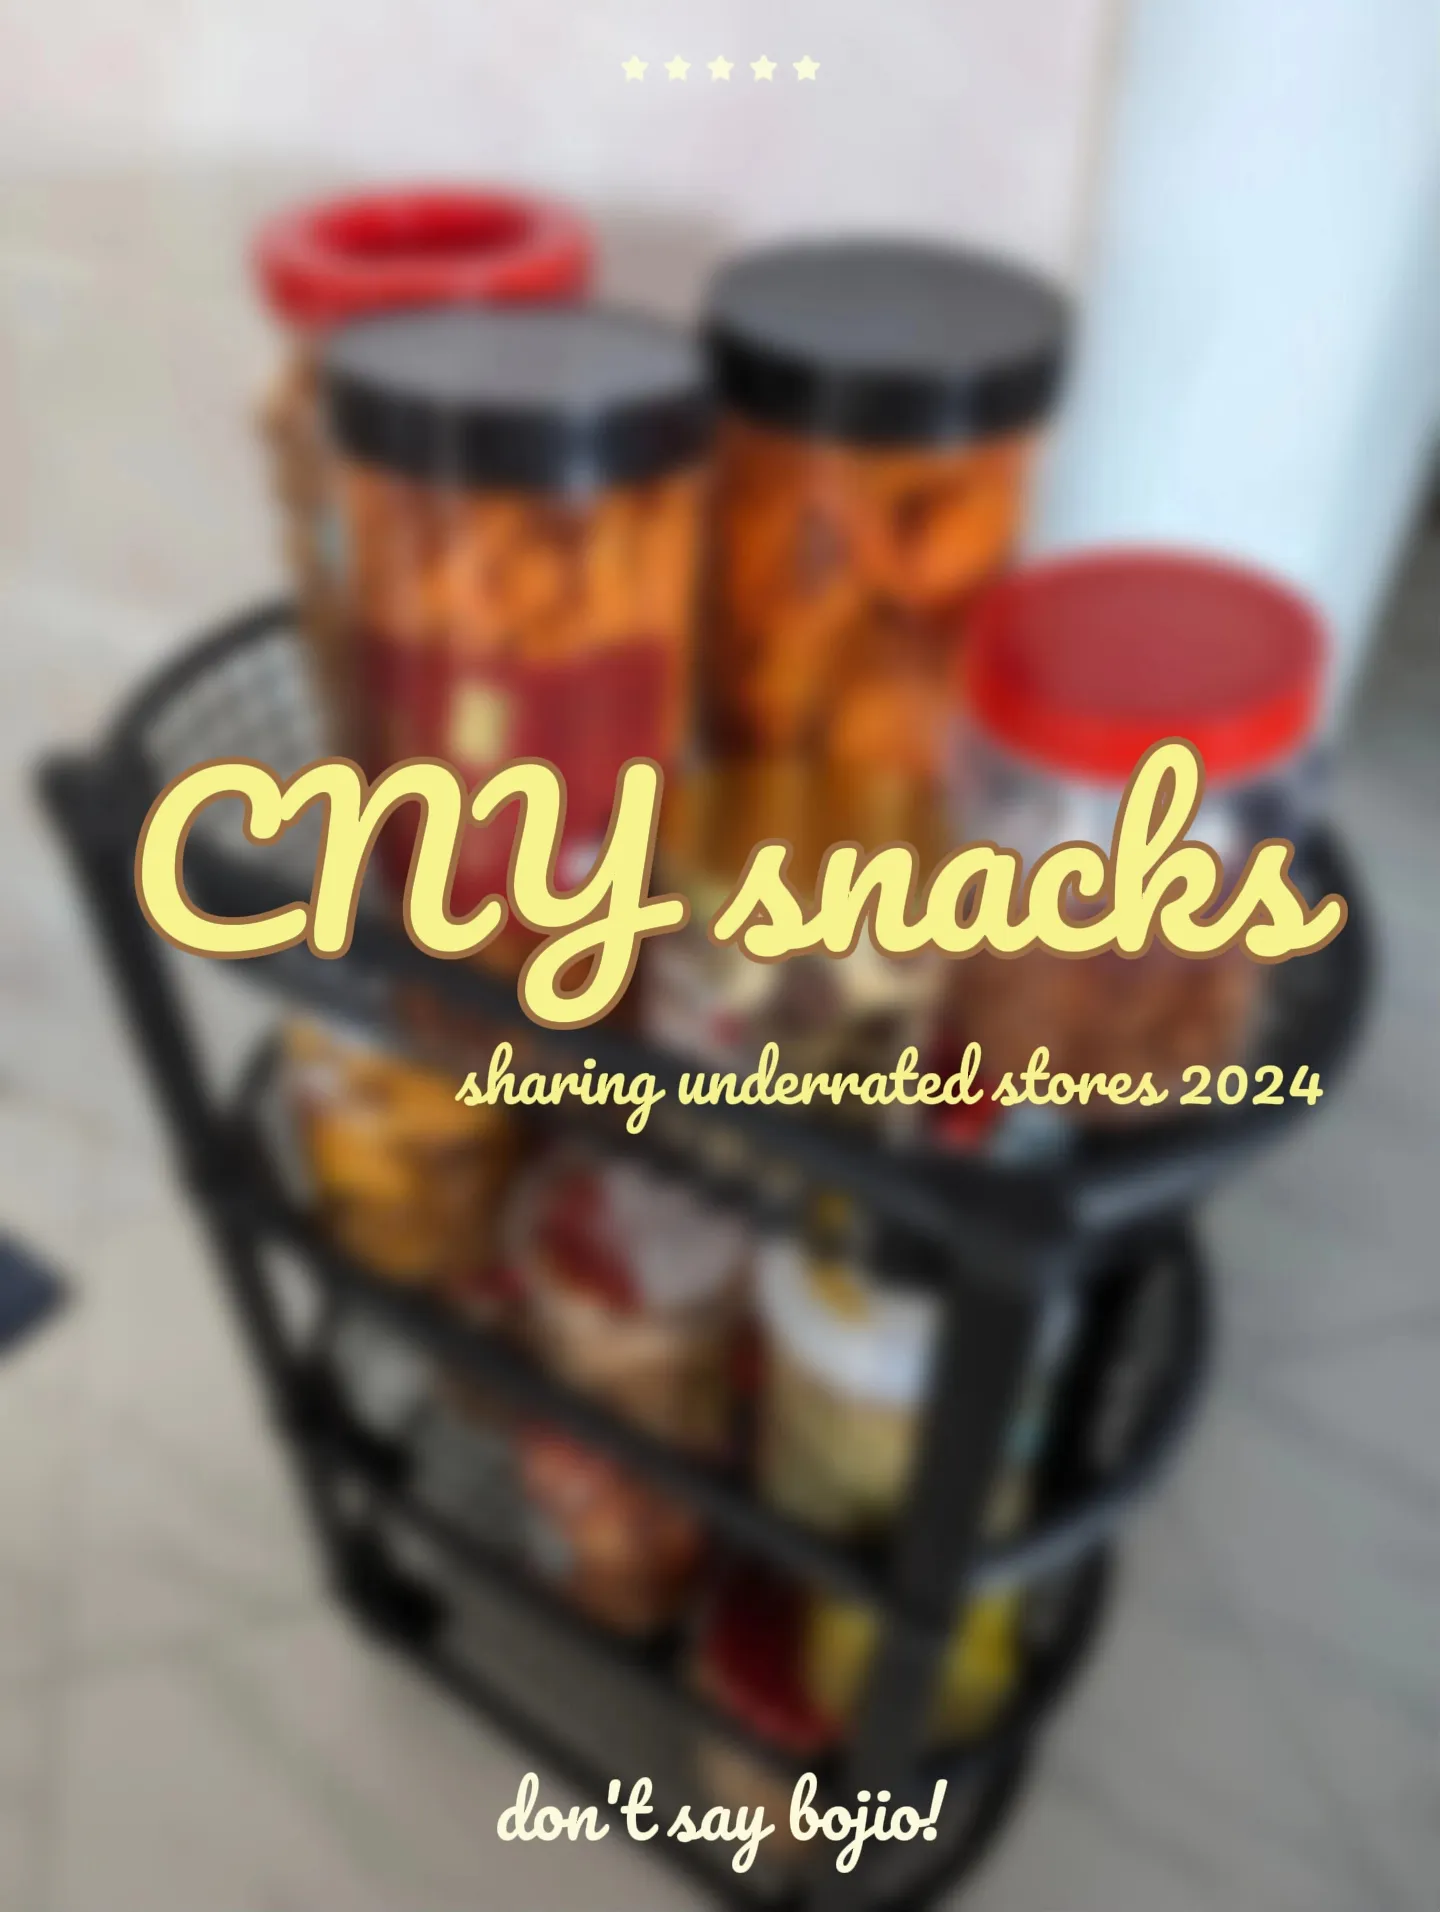 Have you tried their snacks yet?'s images